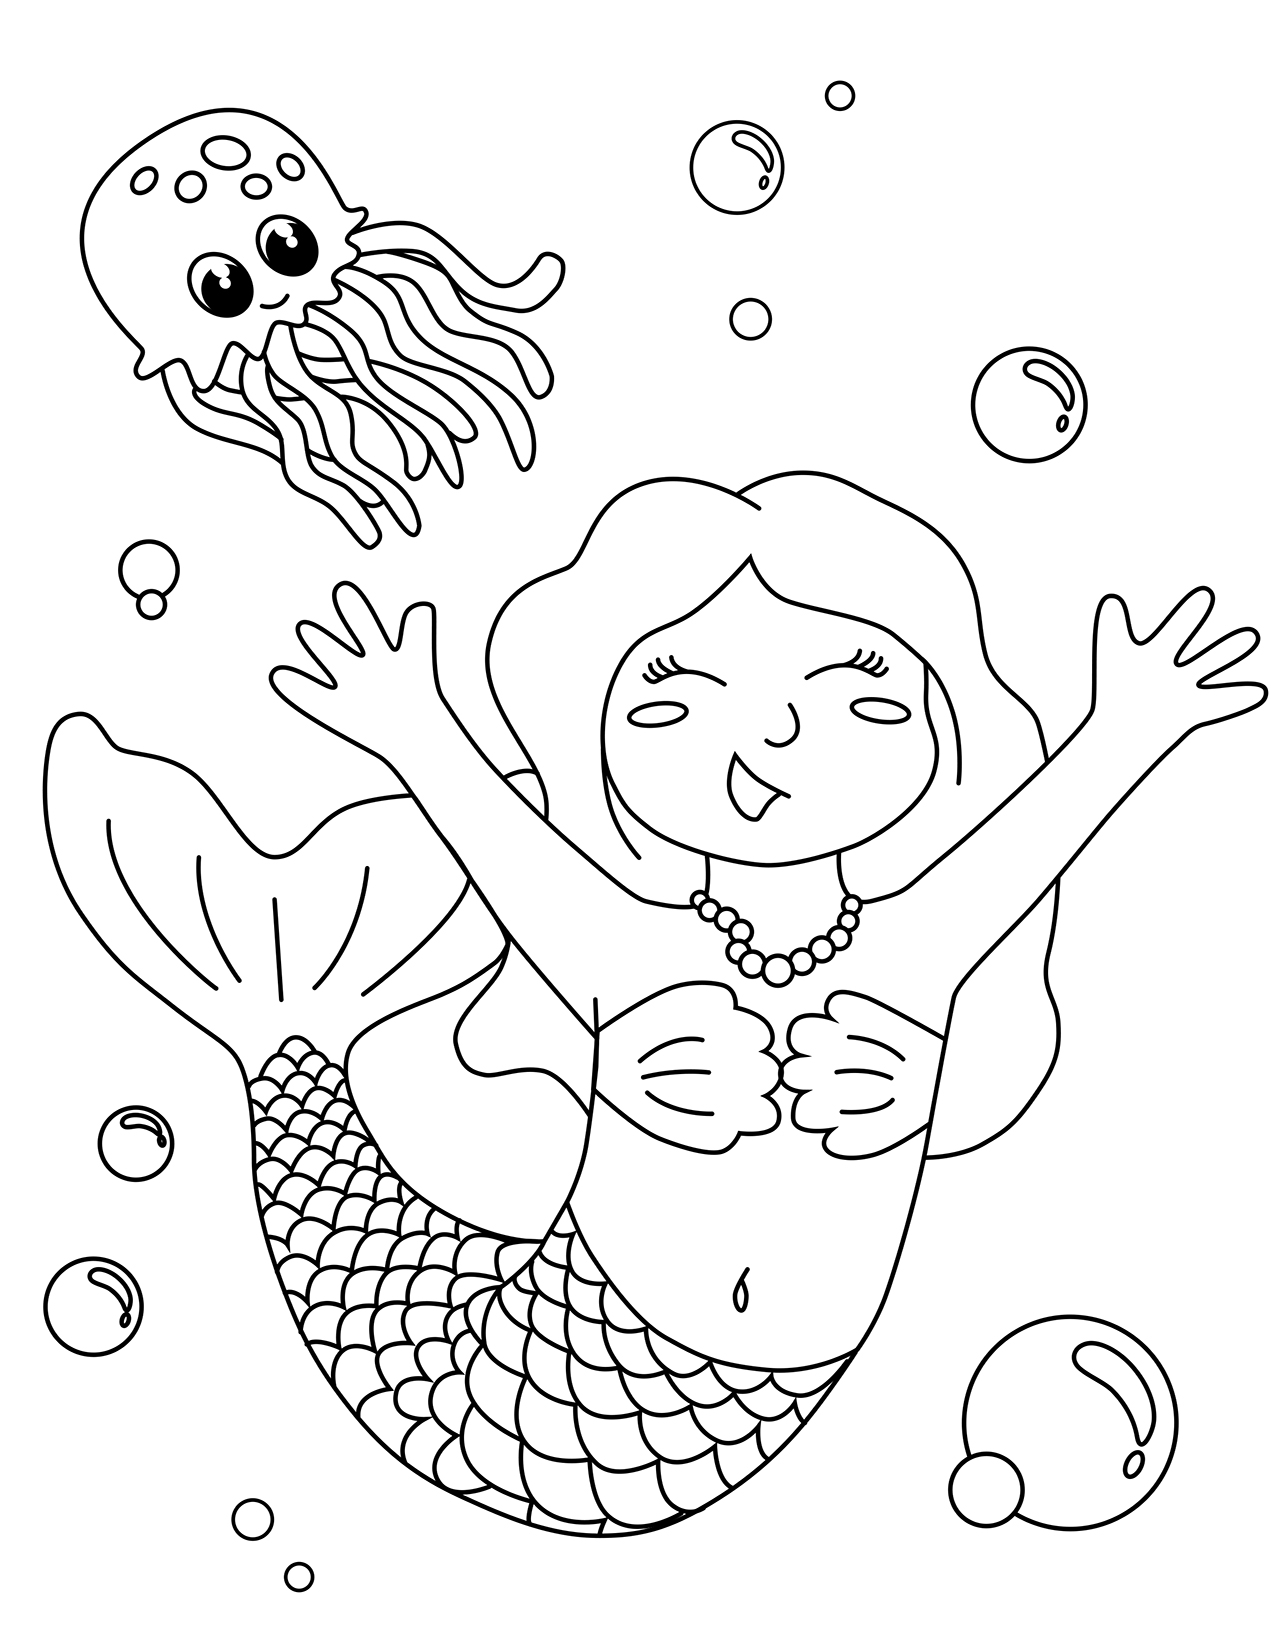 Baby Mermaid Princess Coloring Pages - Pdf instant download file a size